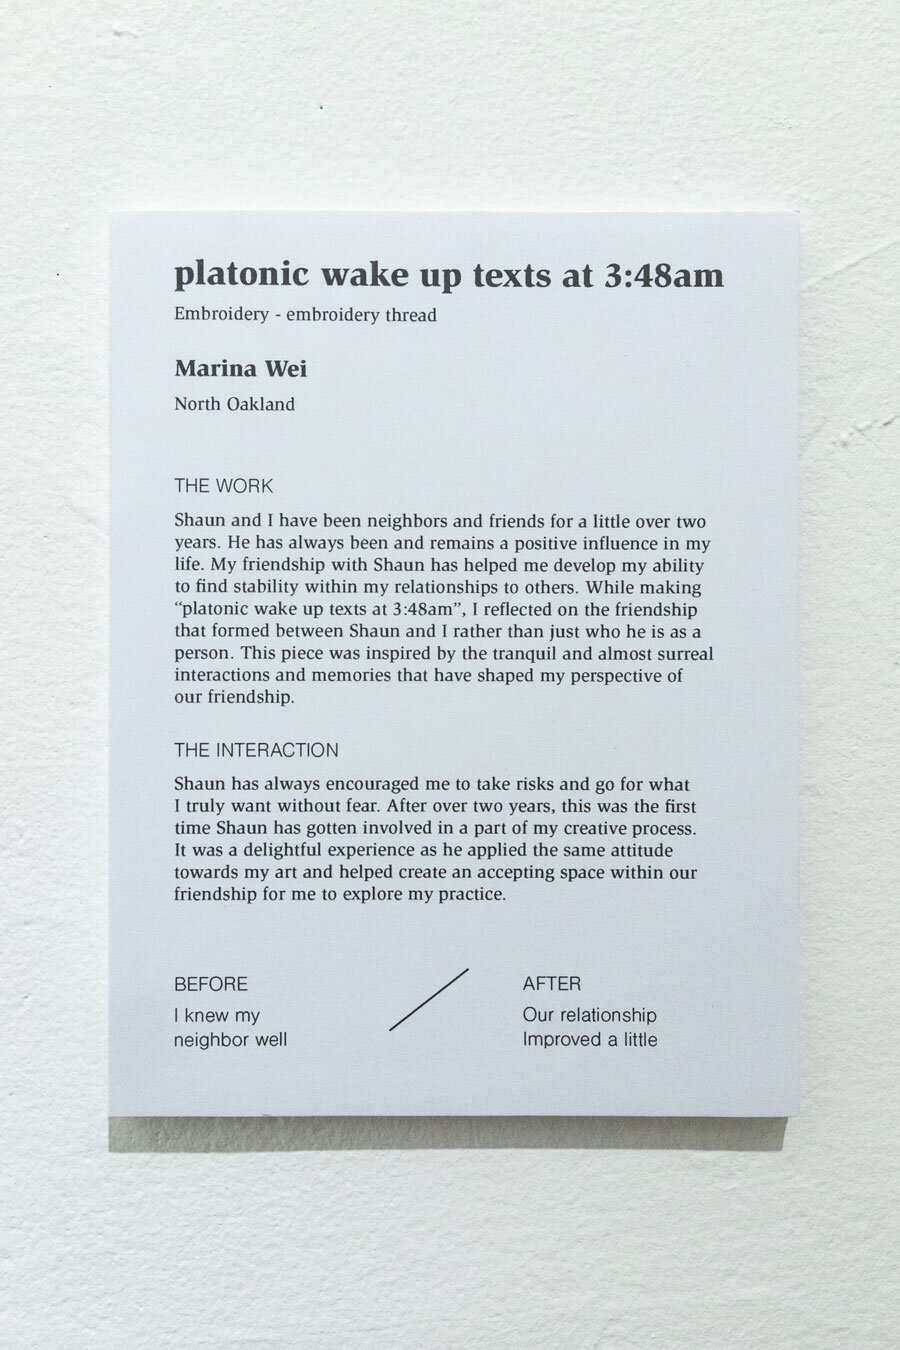 Wall label text for platonic wake up texts at 3:48am